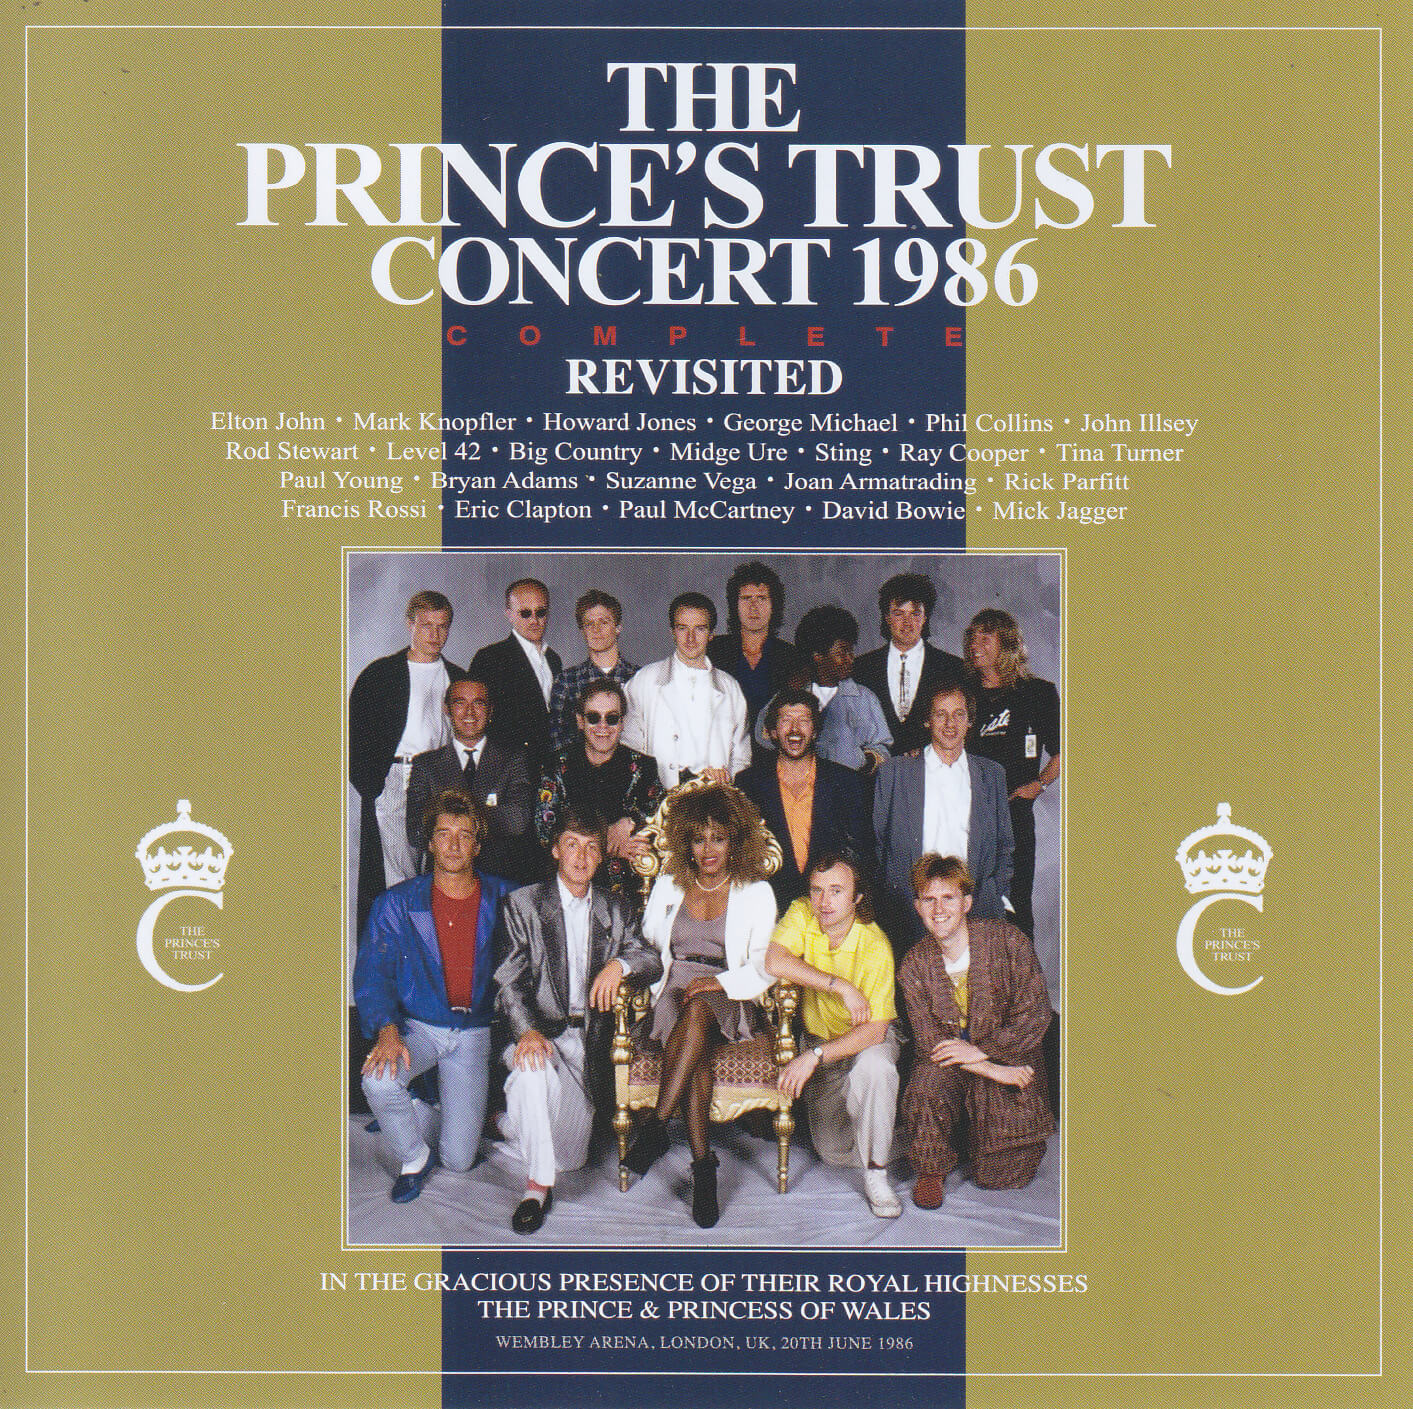 Various Artist / The Princes Trust Concert 1986 Complete Revisited